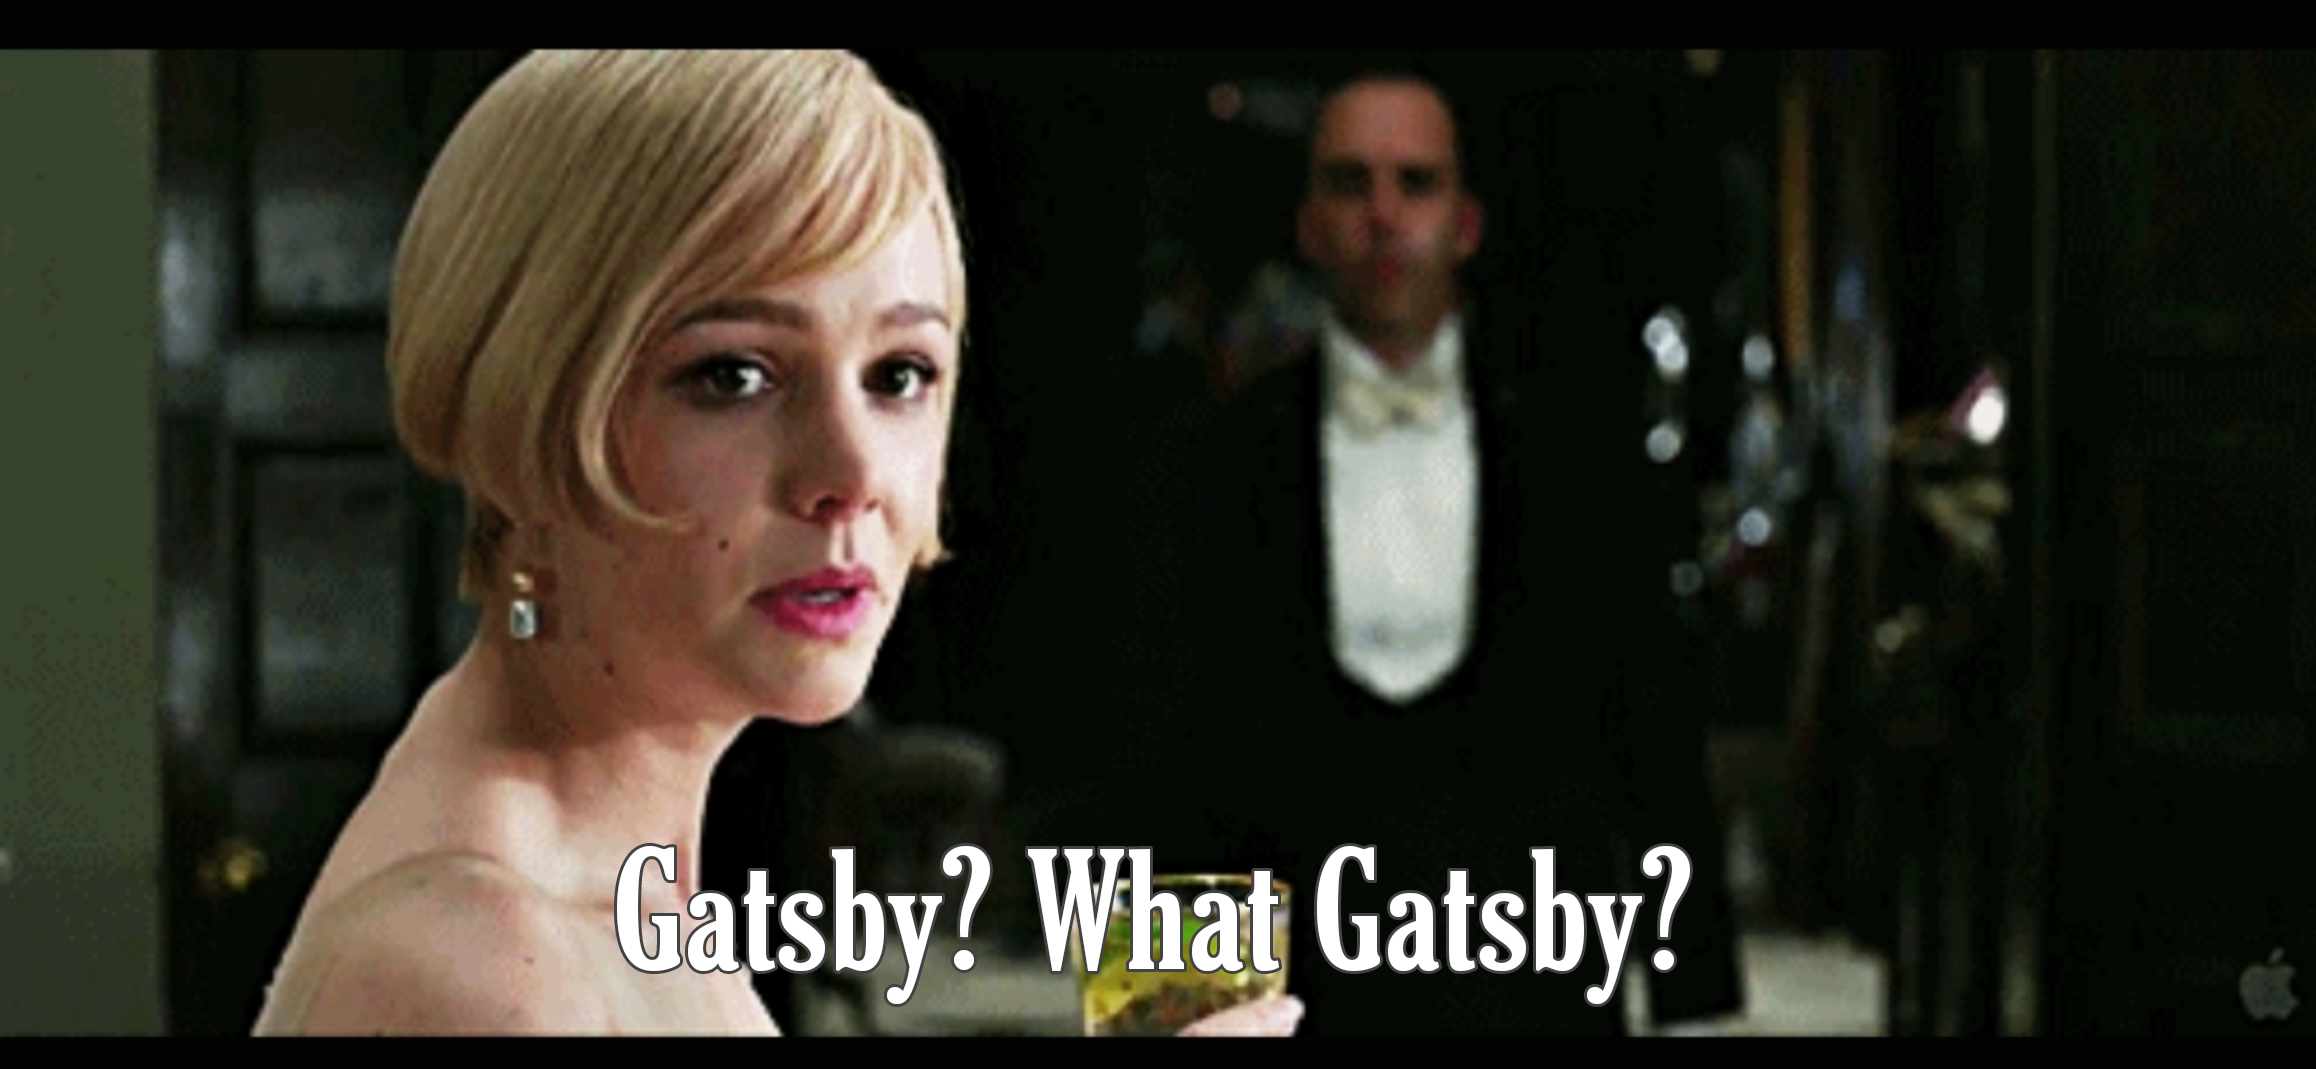 High Quality What Gatsby? Blank Meme Template